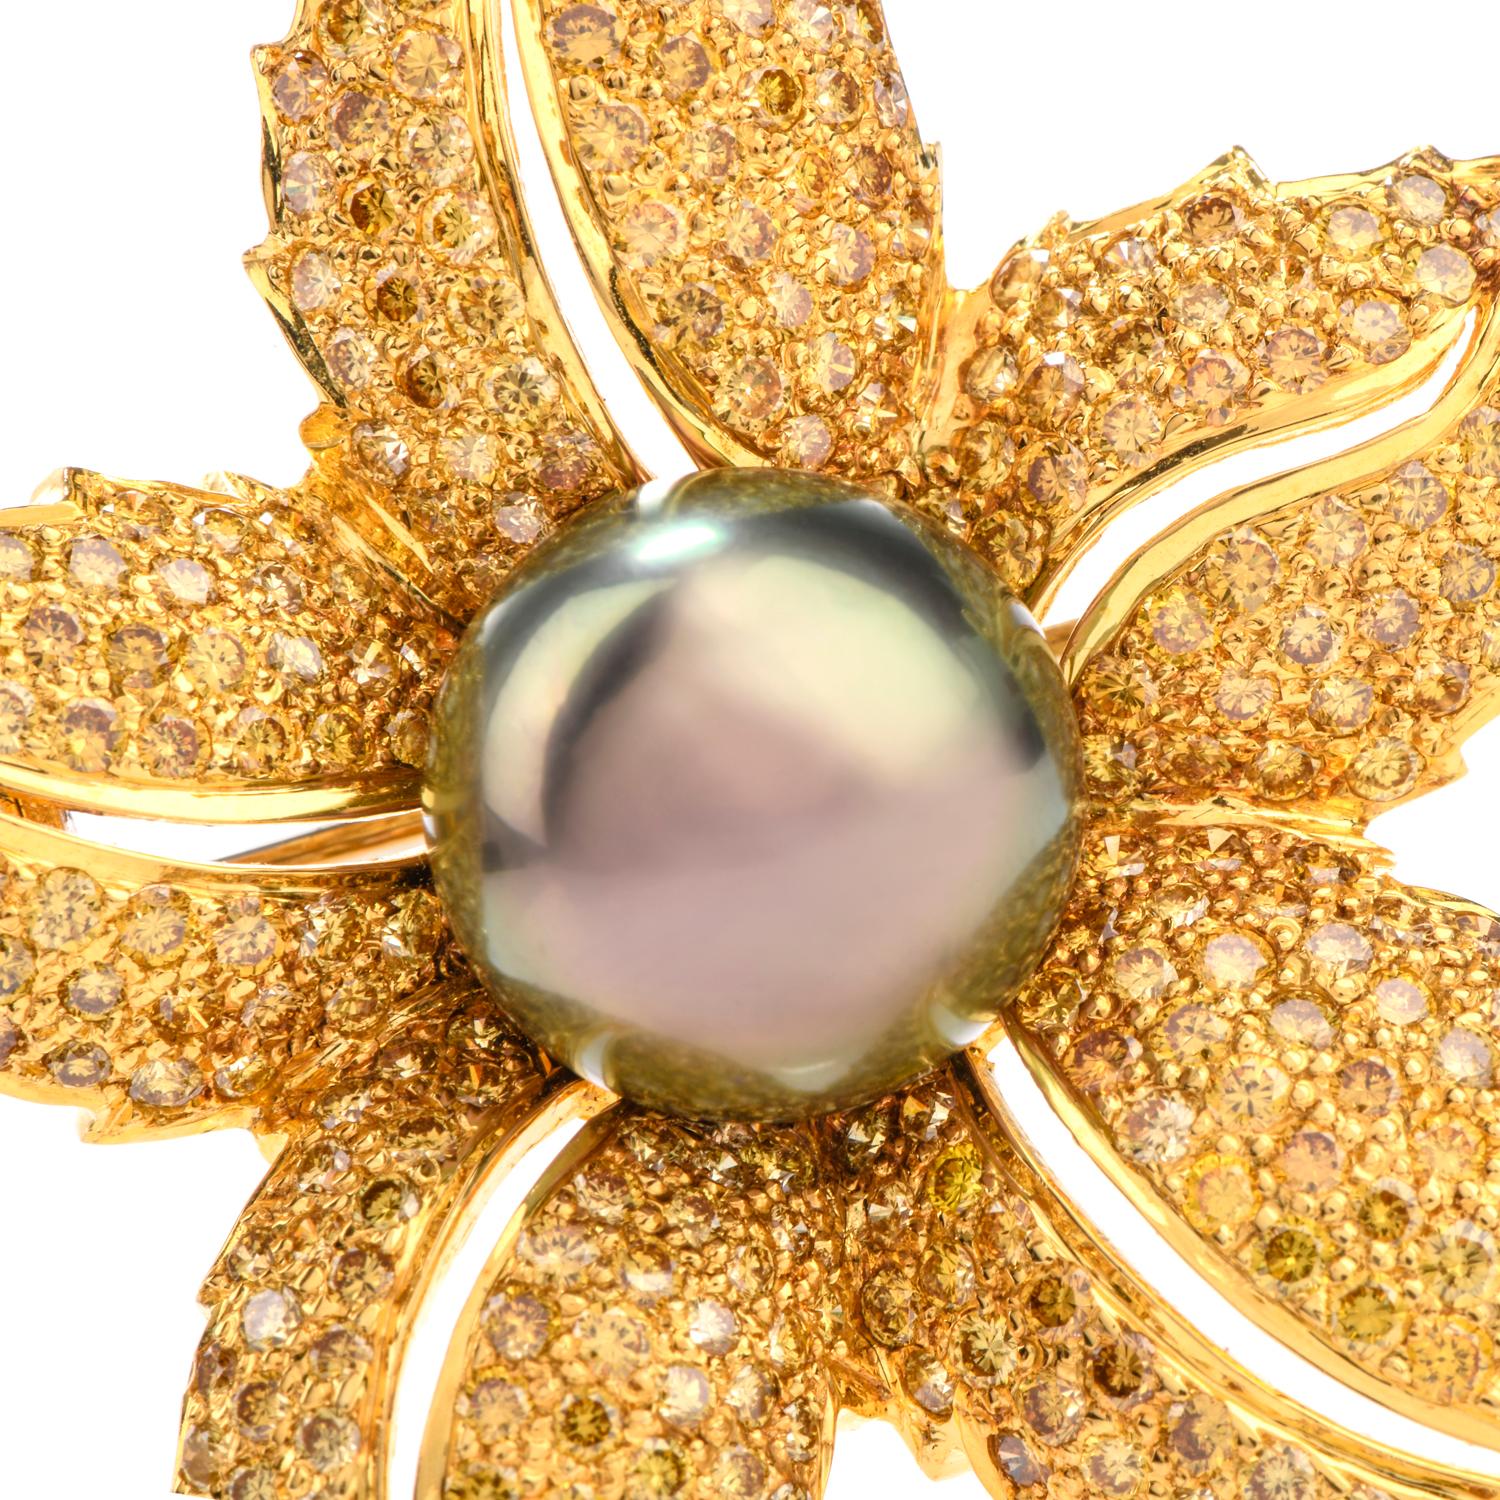 This incredibly bright and glistening brooch was inspired in a

tropical floral motif and crafted in 18K yellow gold.

Measuring appx. 1.5 x 2.0 inch, the brooch is certain

to make a statement.  Featuring one 12mm Tahitian pearl in the center,